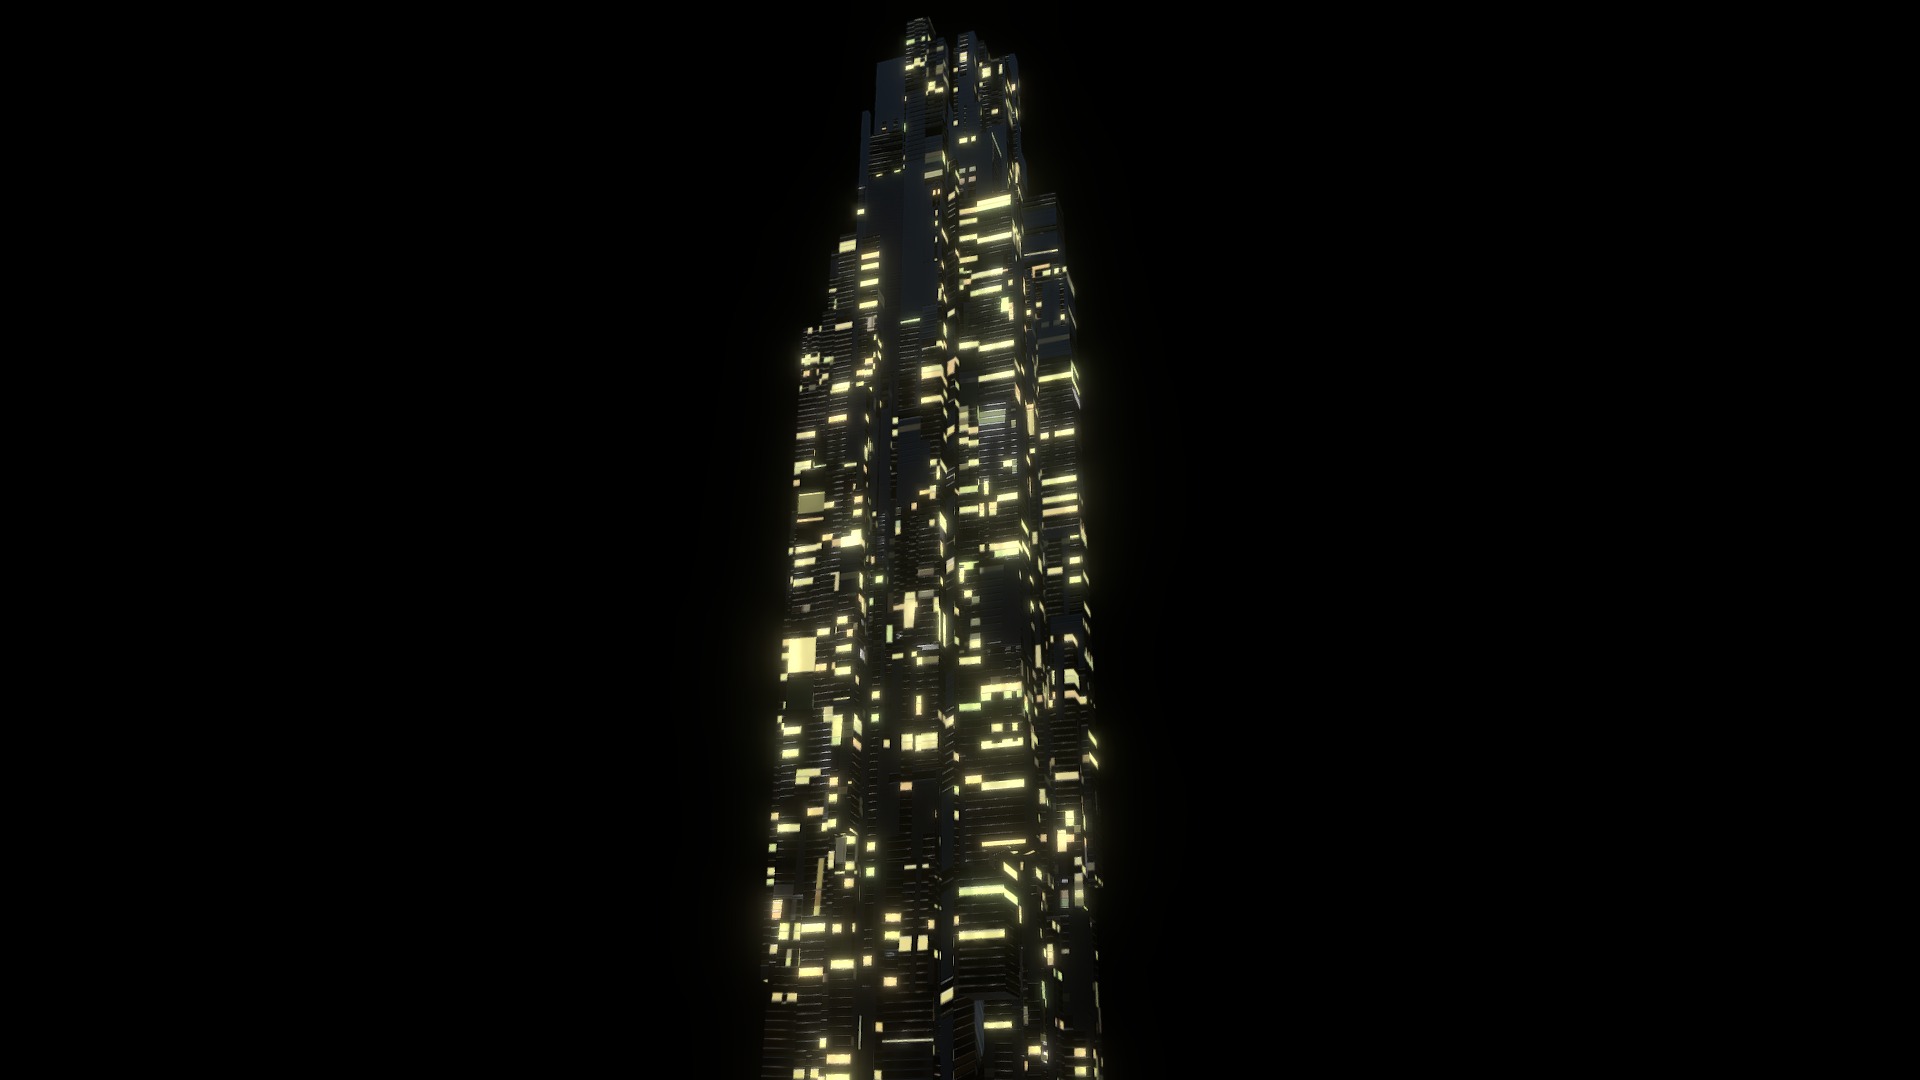 3D model Sci fi Skyscrapers 1 - This is a 3D model of the Sci fi Skyscrapers 1. The 3D model is about a tall building lit up at night.